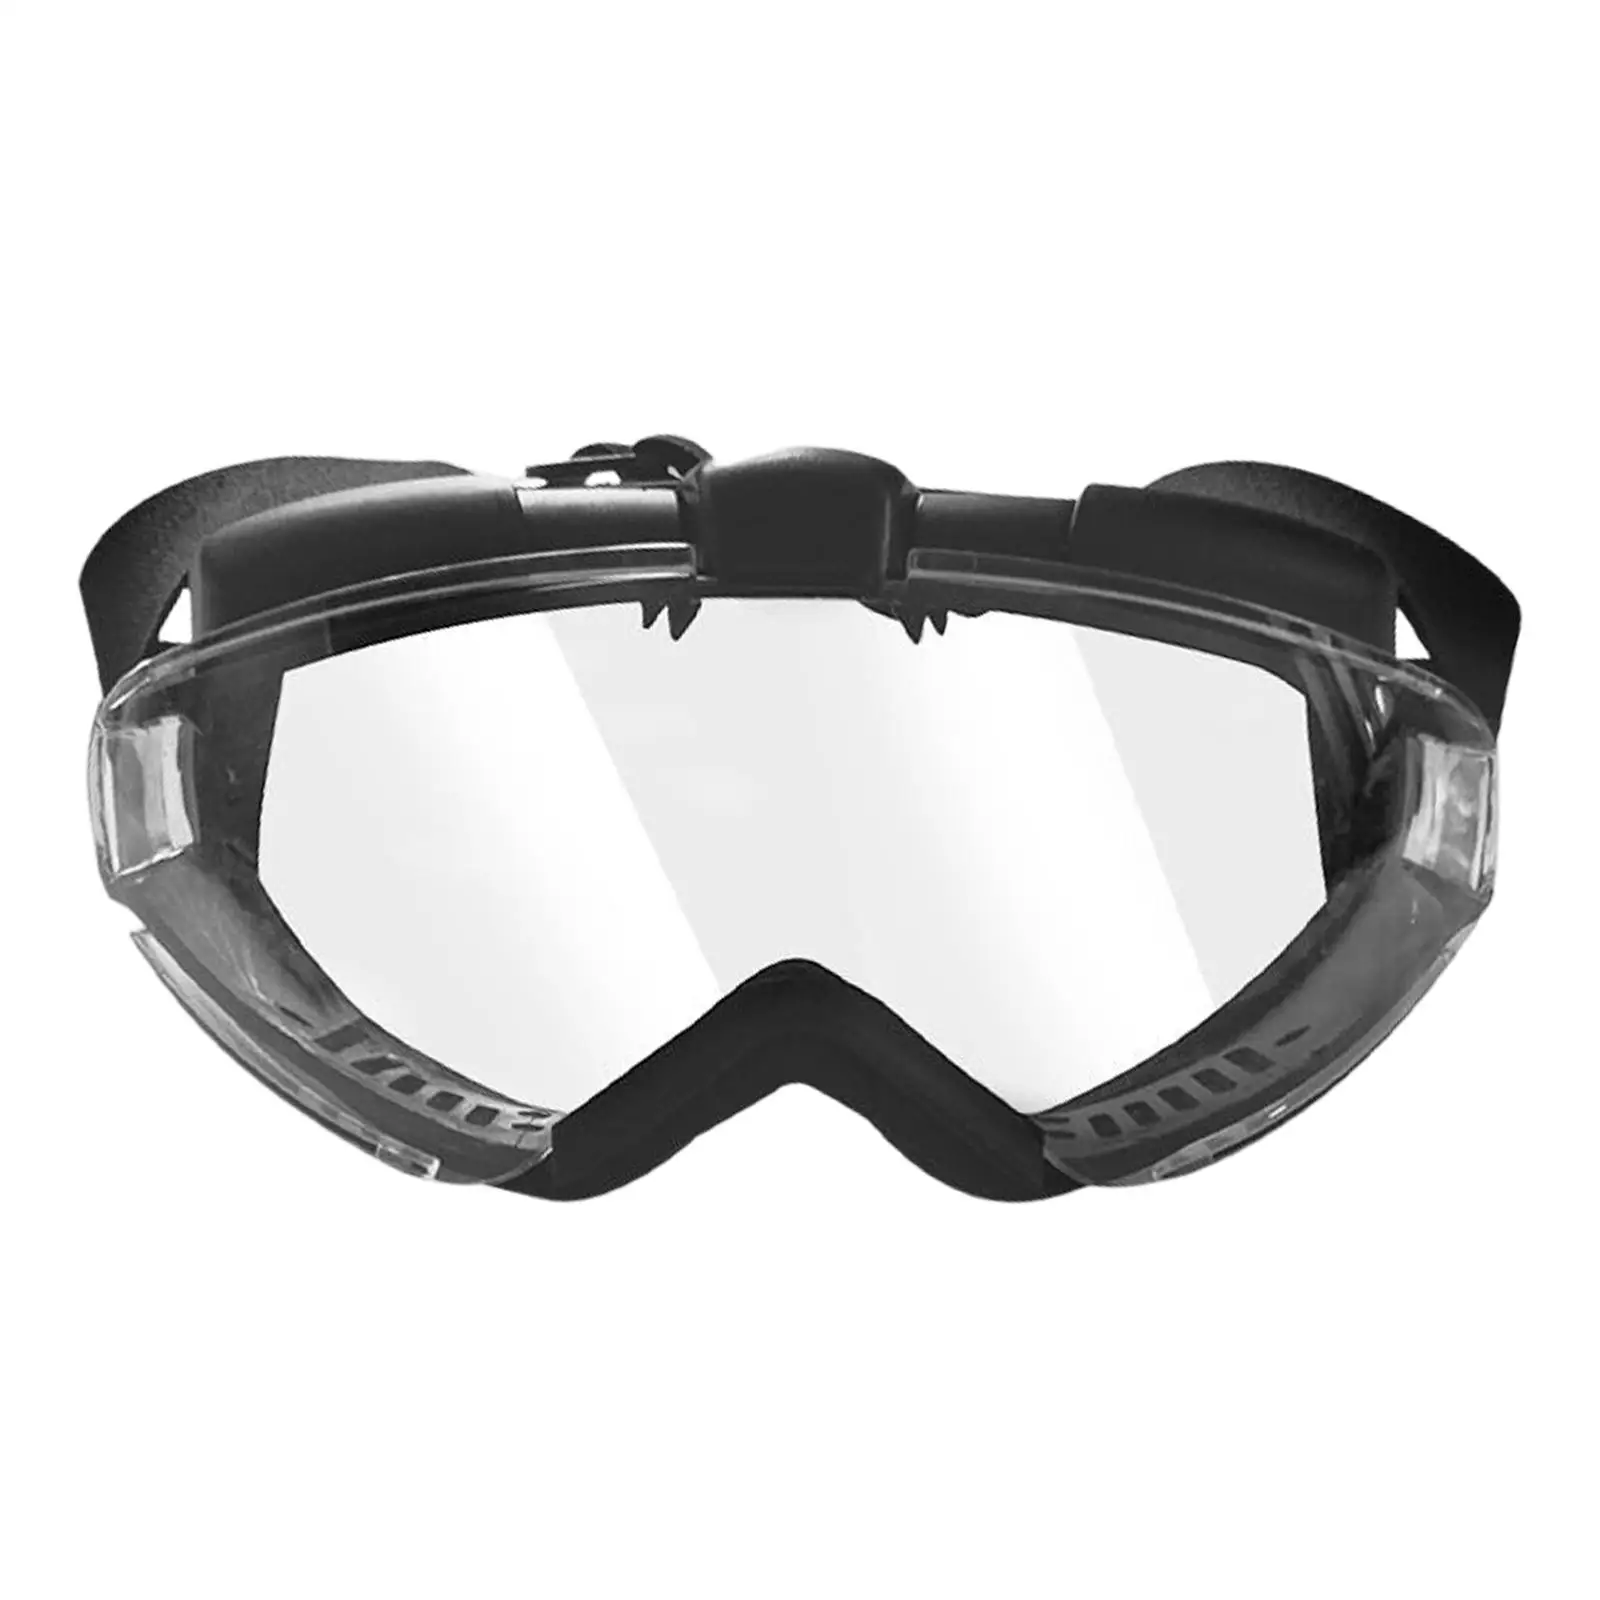 Outdoor Glasses Eye Protection Men Women Adjustable Strap for Snowmobiles